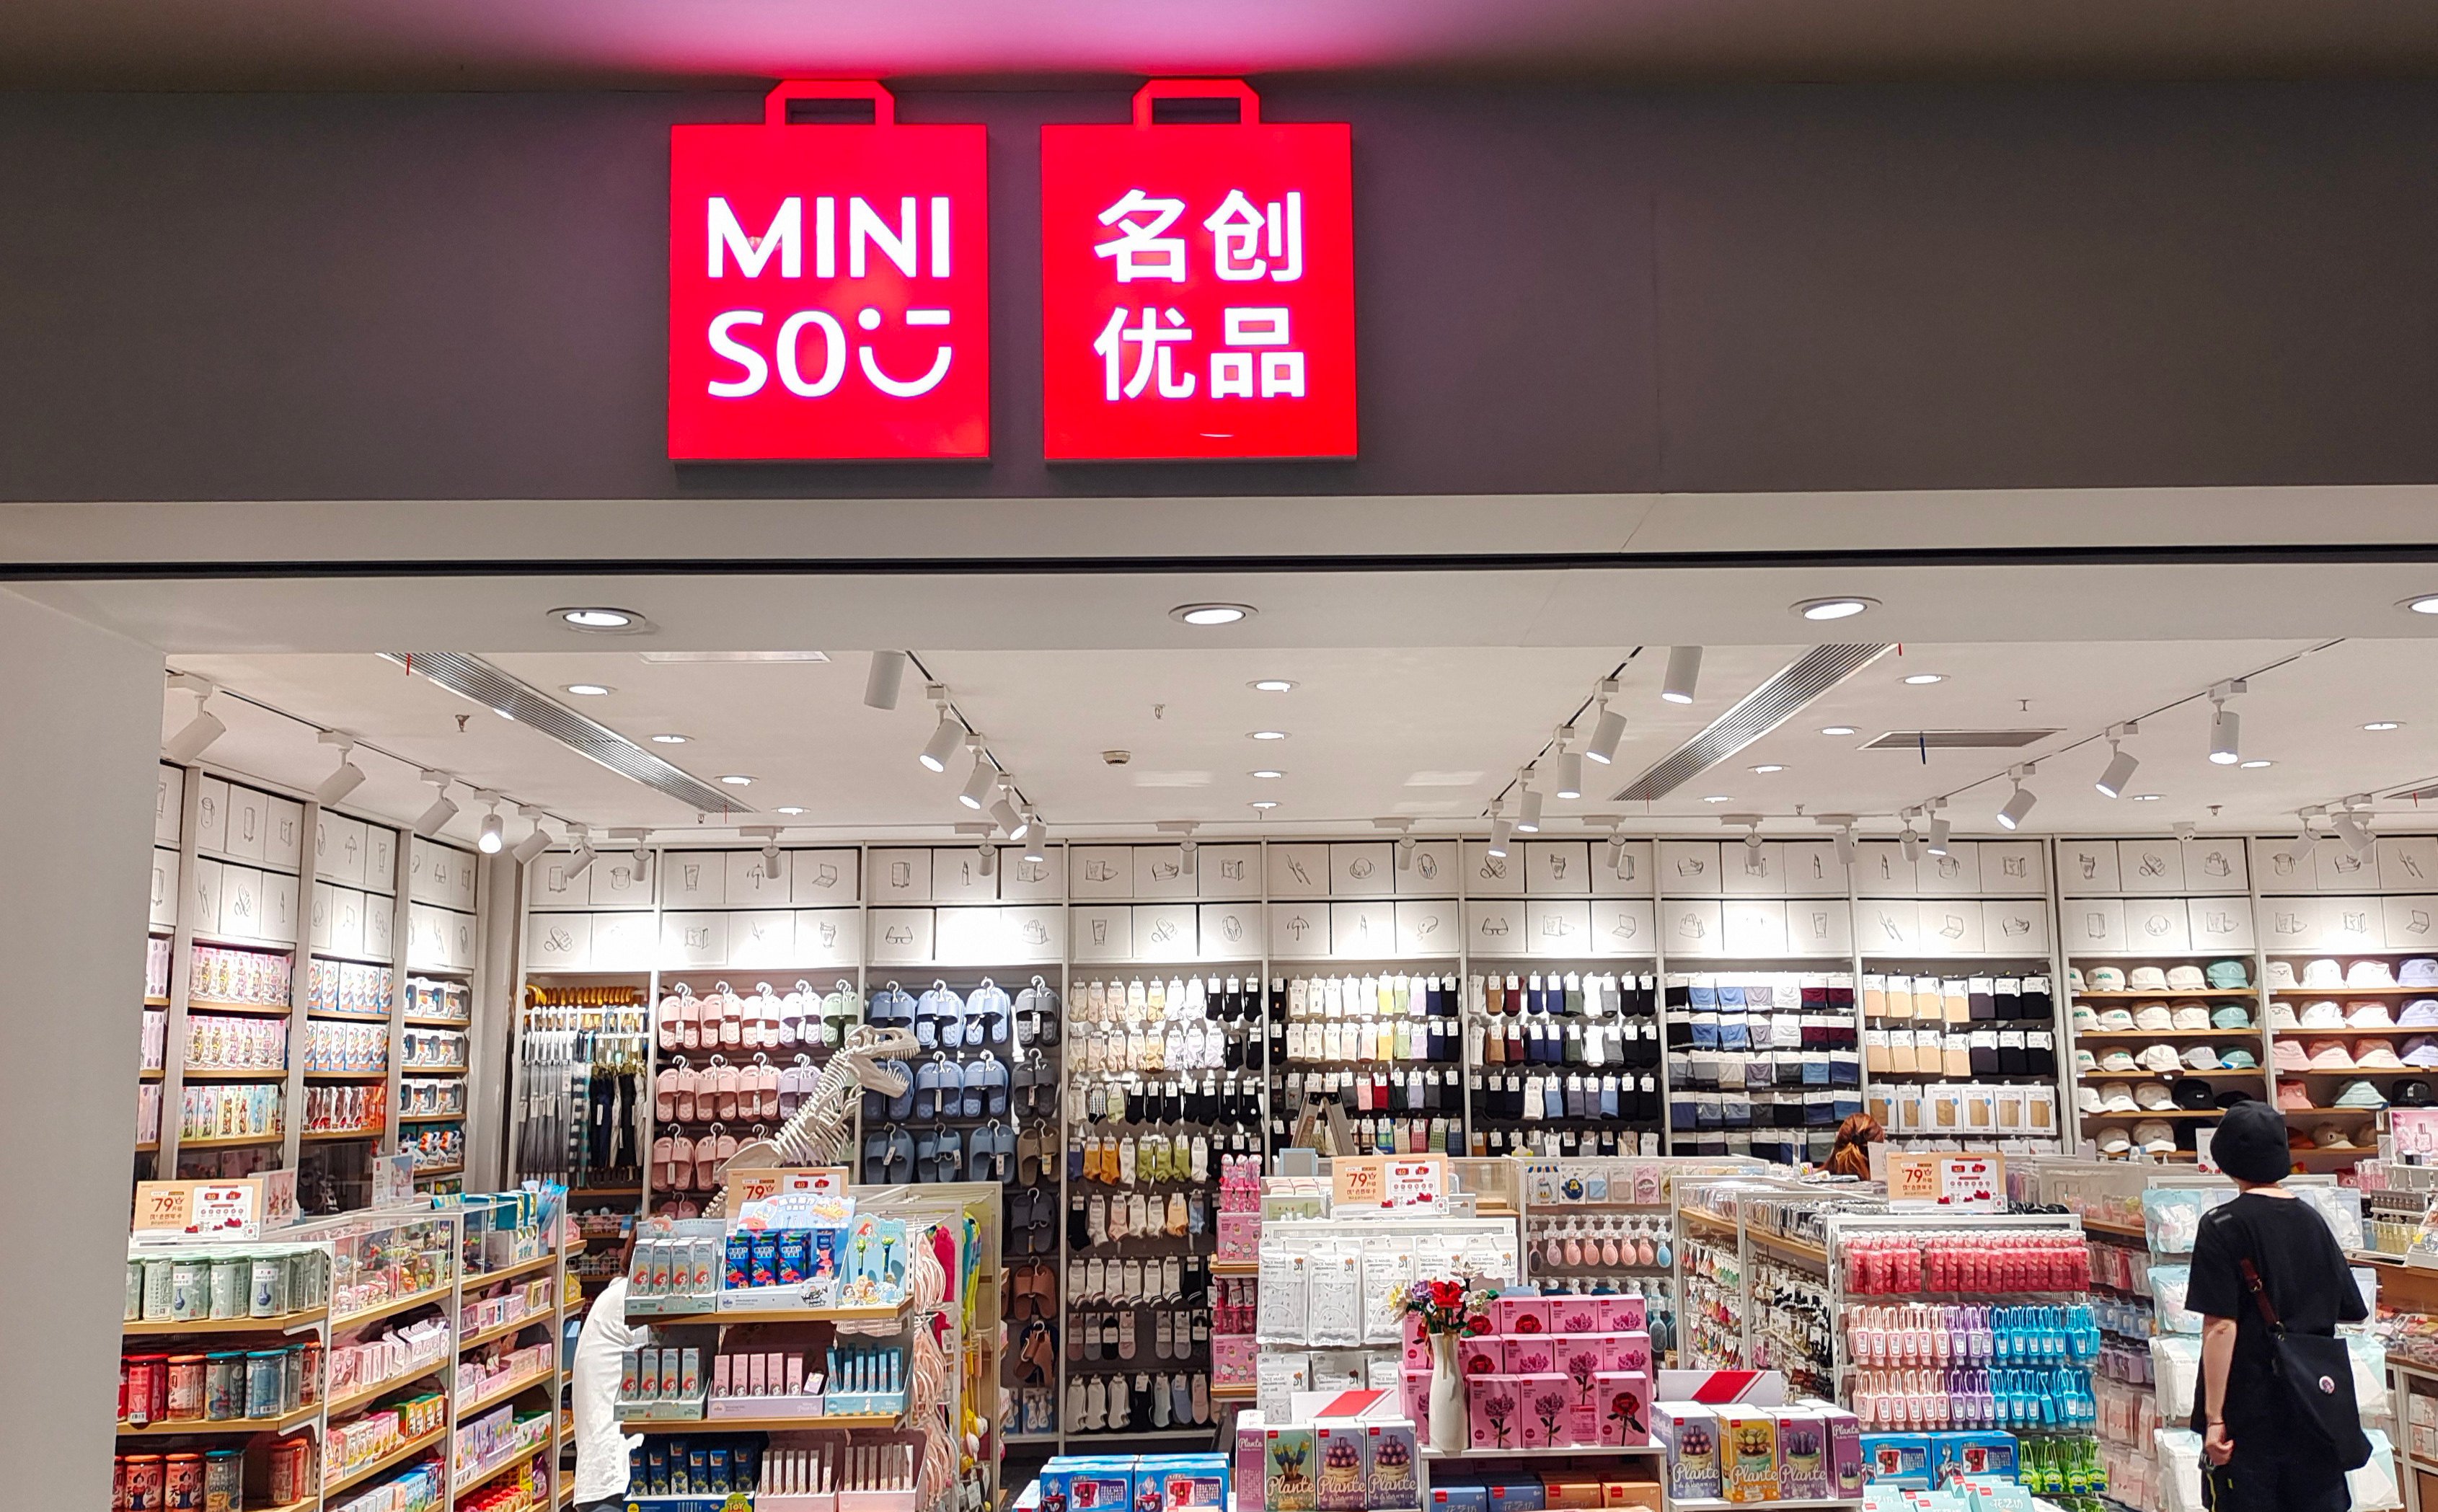 A Miniso store in Shanghai. More than 60 per cent of the budget retailer’s stores are located in China. Photo: Getty Images